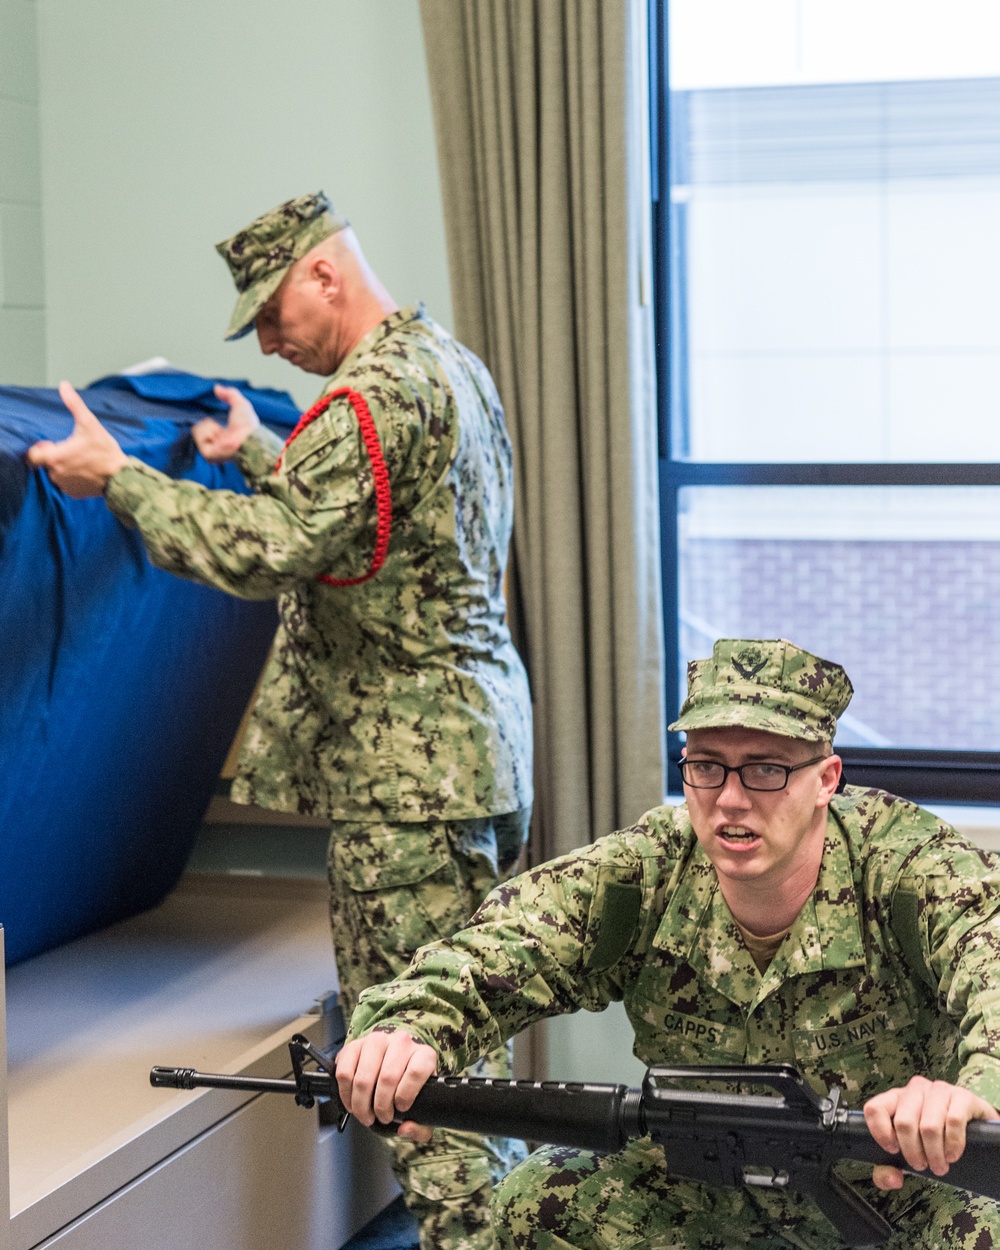 191017-N-TE695-0008 NEWPORT, R.I. (Oct. 17, 2019) – Navy Officer Candidate School conducts Room, Locker, Personnel (RLP) inspection